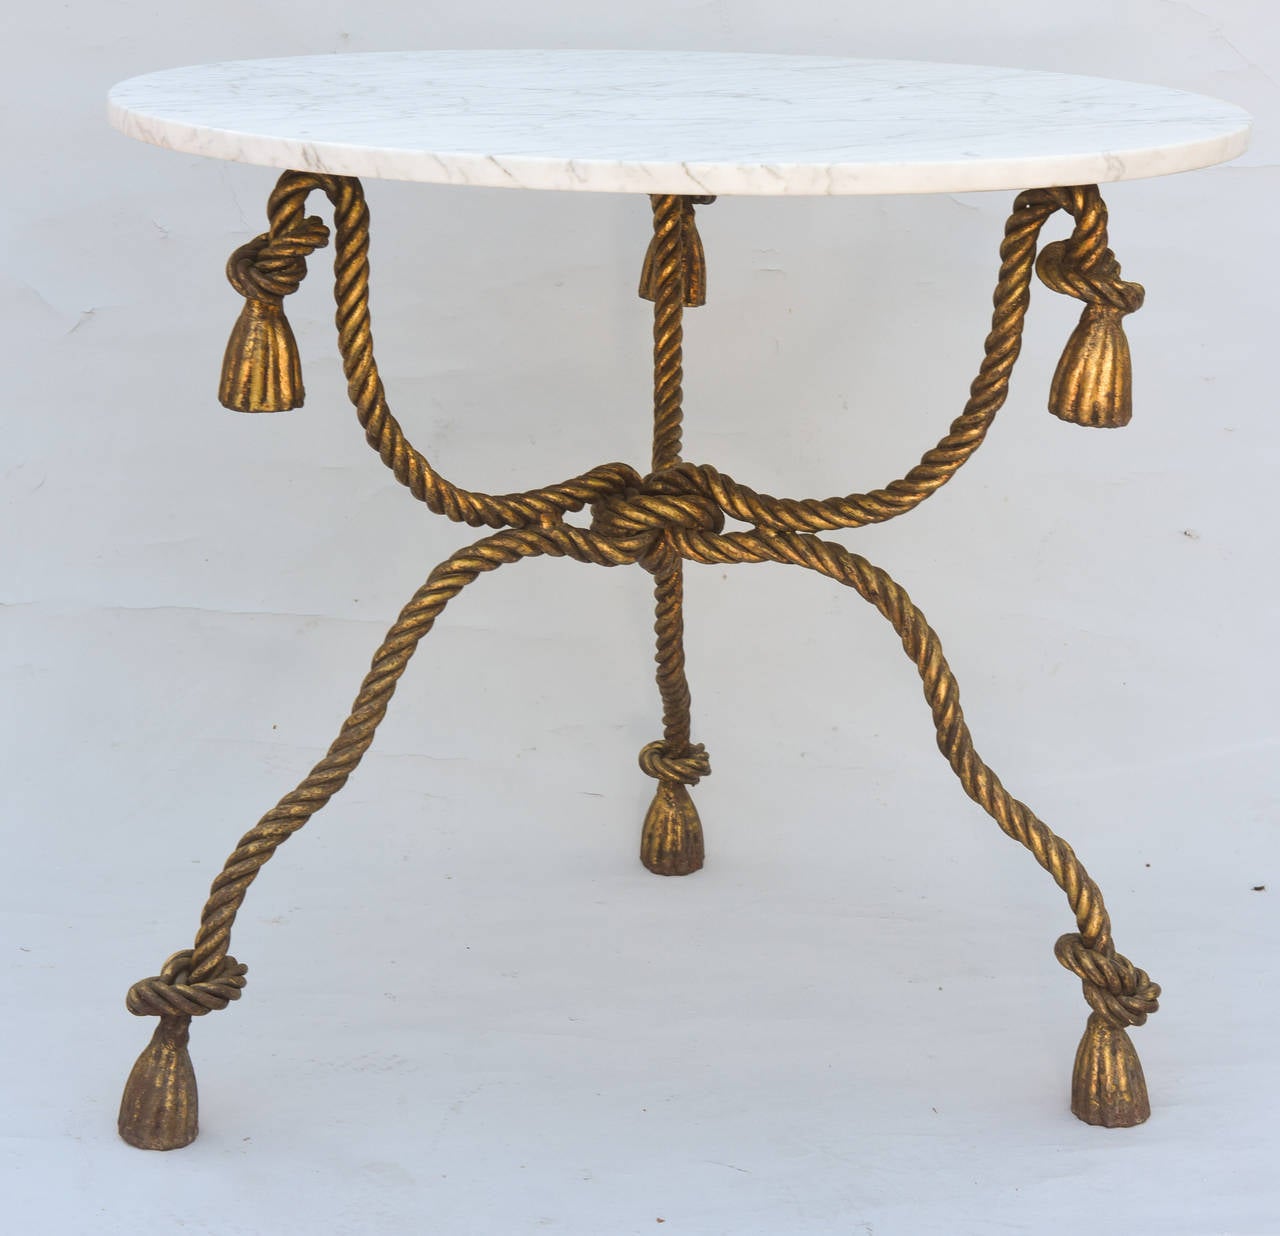 Occasional table, by Niccolini, having a round top of Carrara marble, on base of heavy gauge, gilded iron, formed as ropes, joined by a thick knotted stretcher, ending in knots and tassels.

Stock ID: D6338